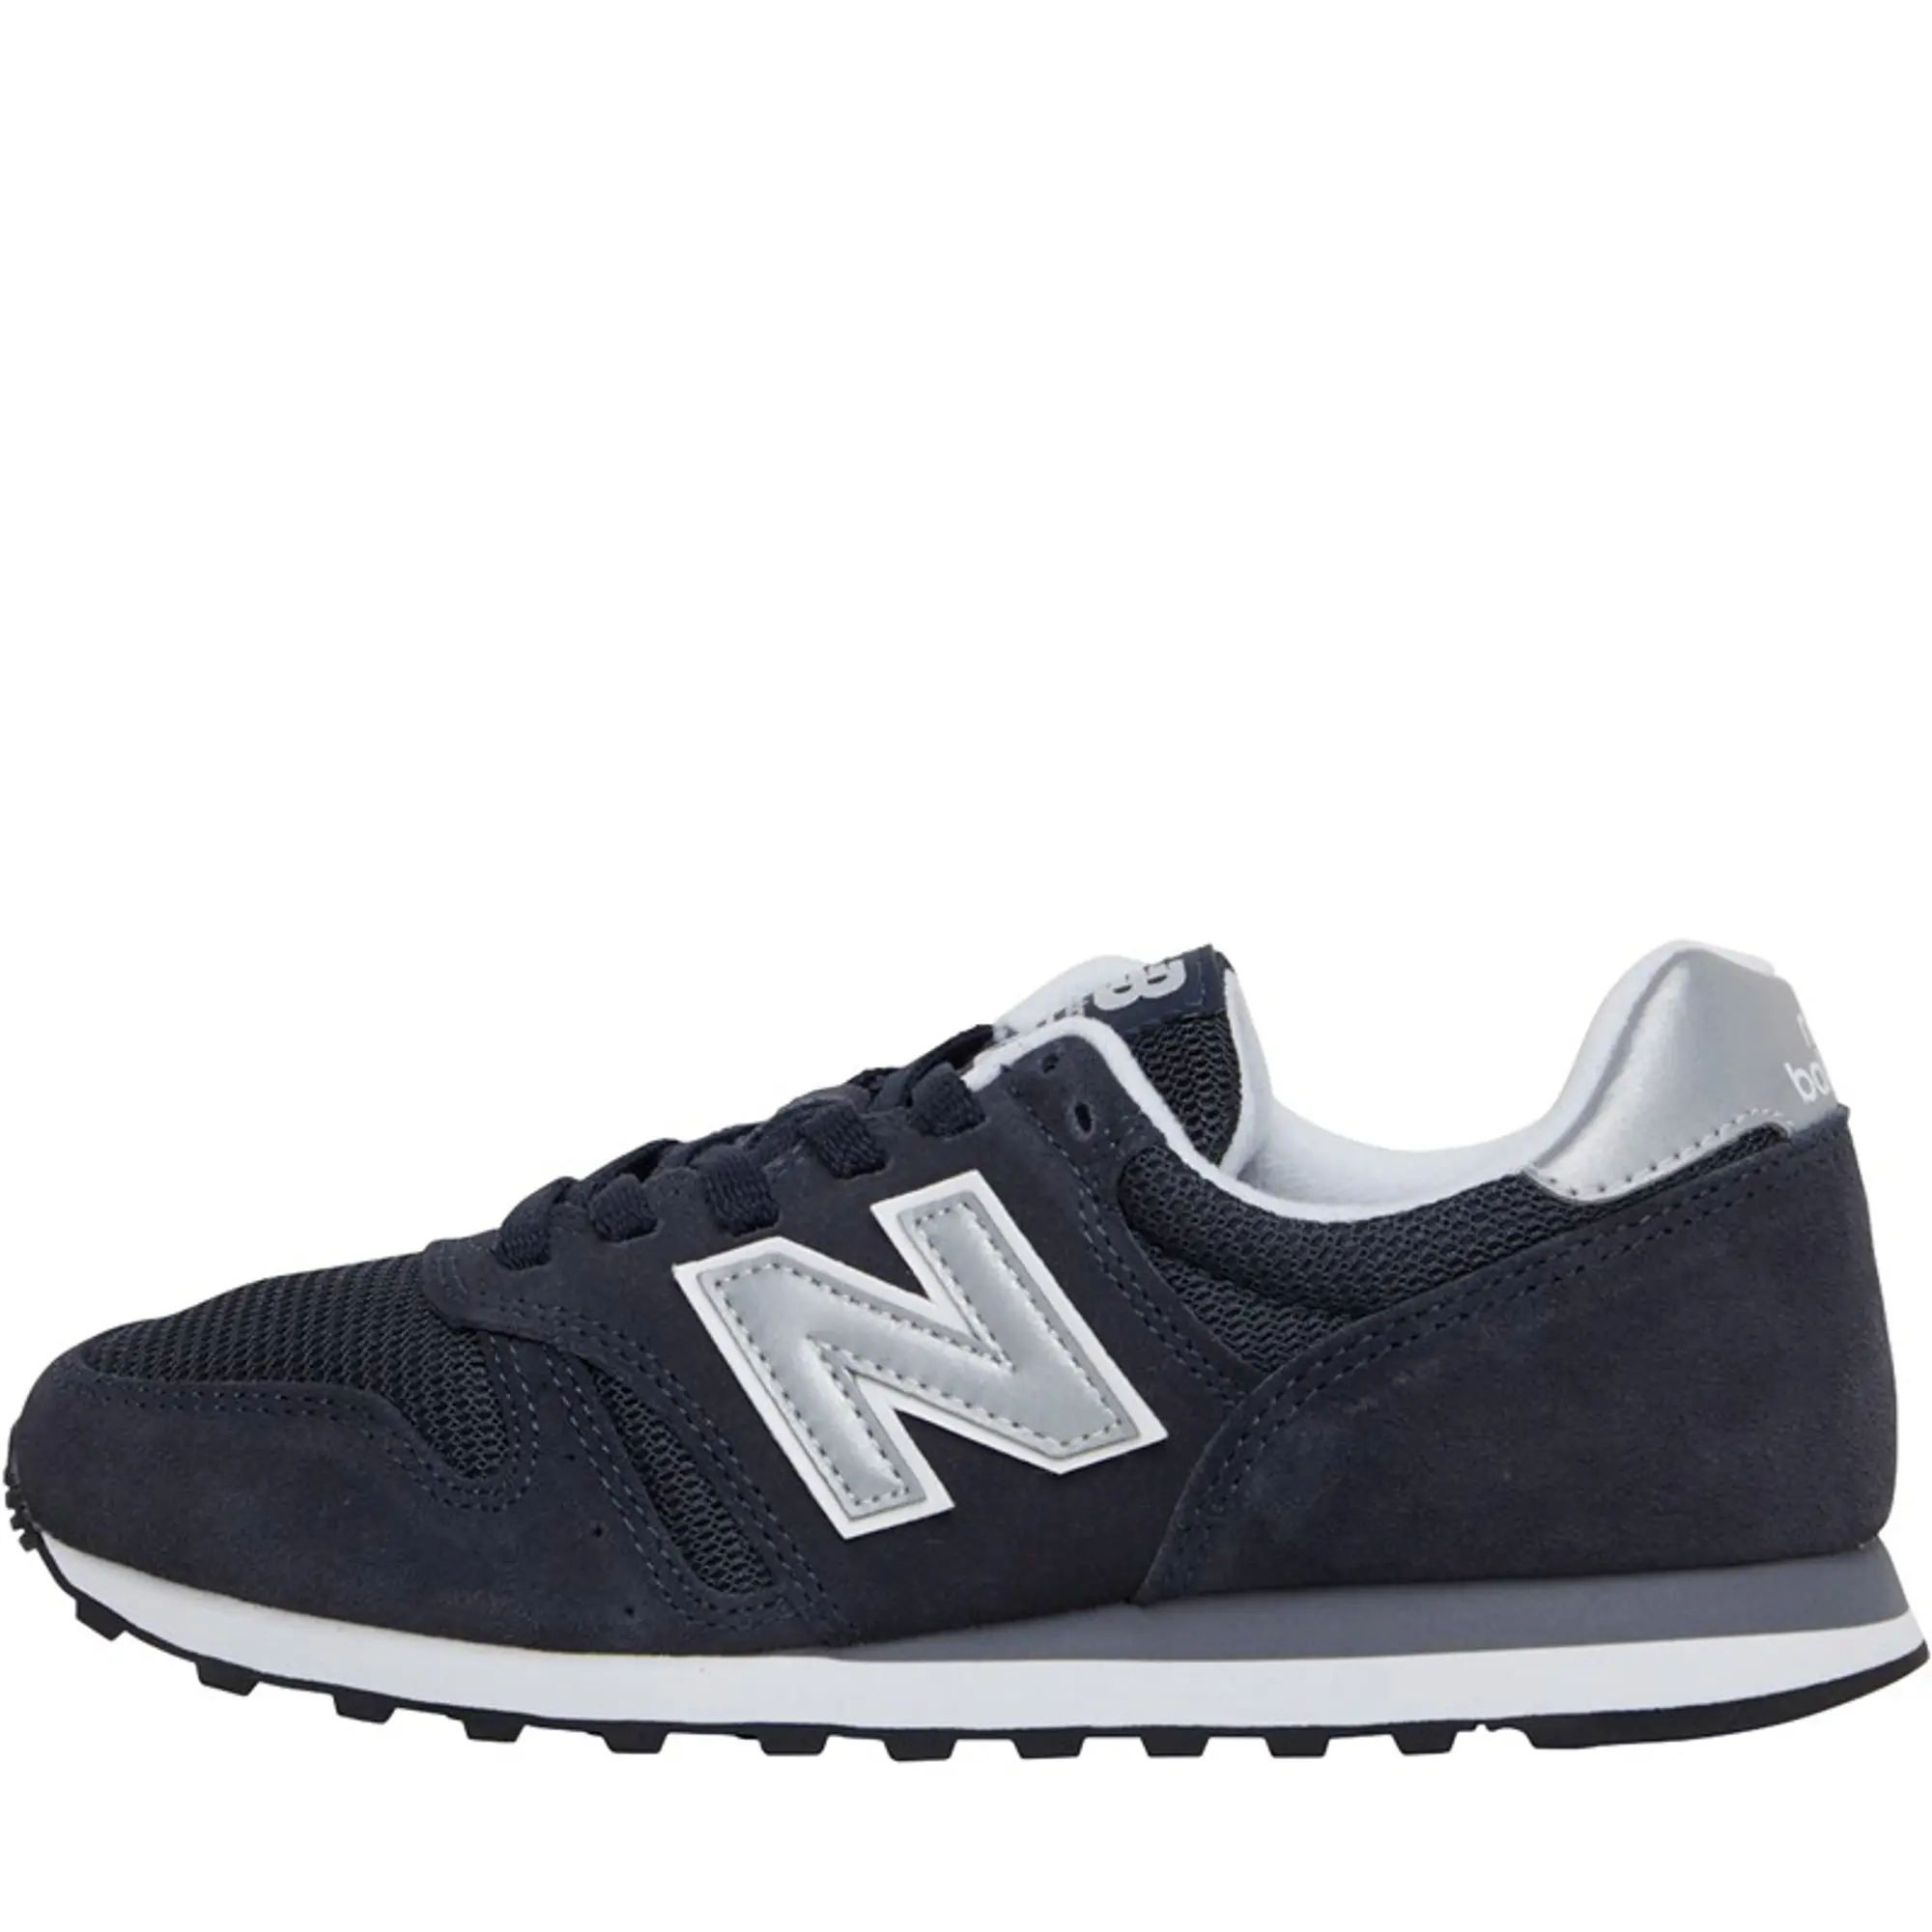 New Balance Mens 373 Trainers Navy/Silver